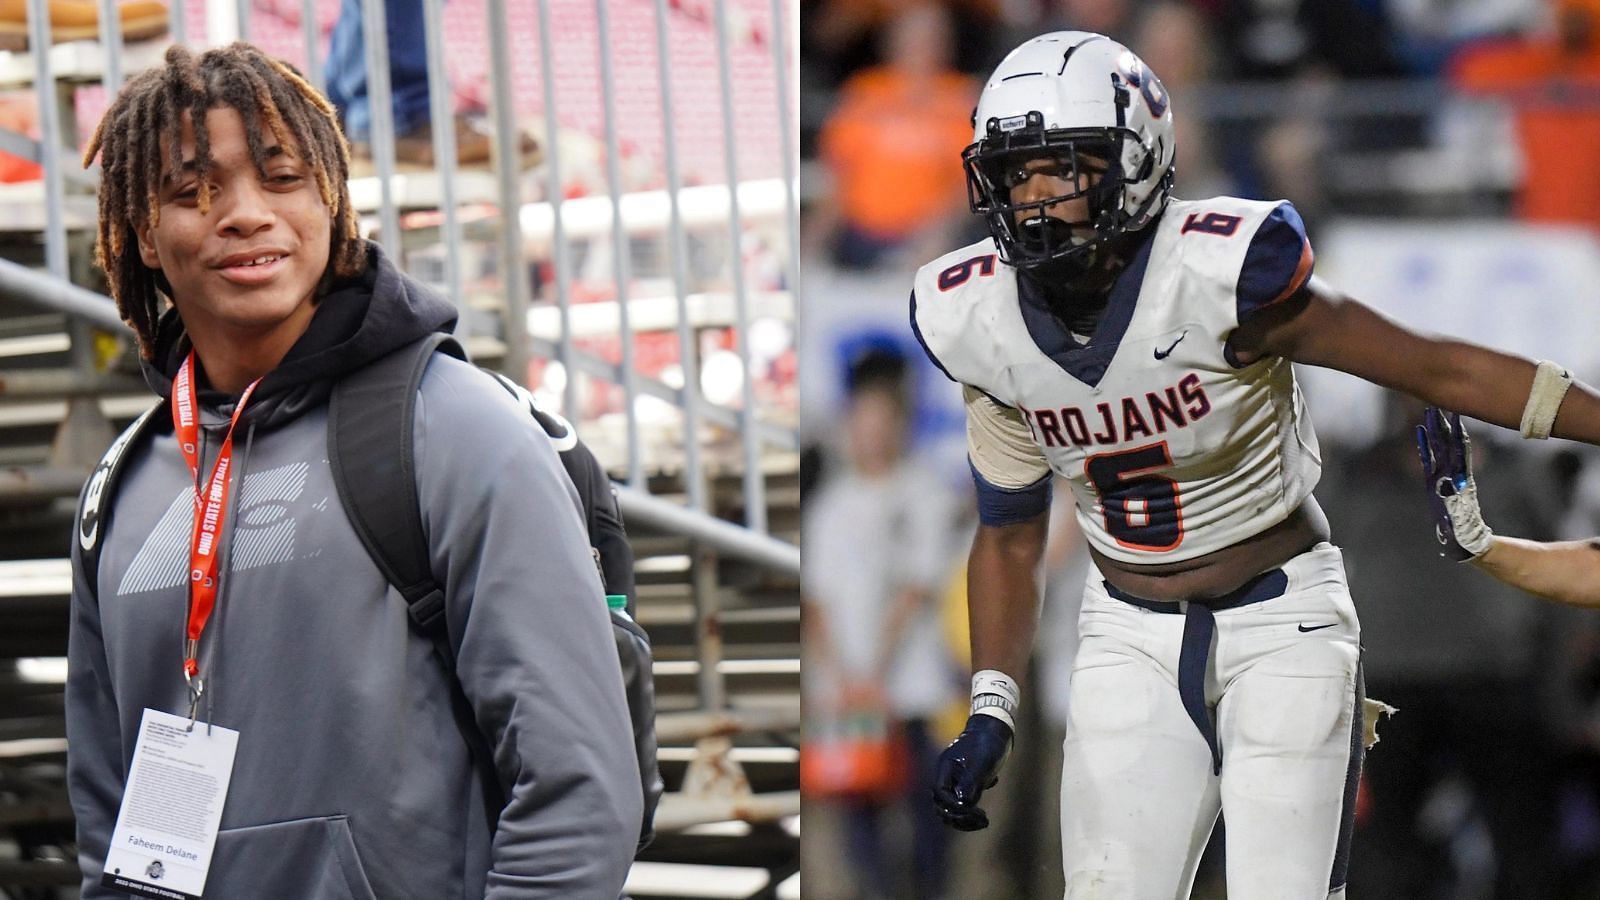 Ohio State commits Faheem Delane and Zion Grady are part of a massive class for Ryan Day (Photo credits: Delane by The Columbus Dispatch and Grady by The Montgomery Advertiser).